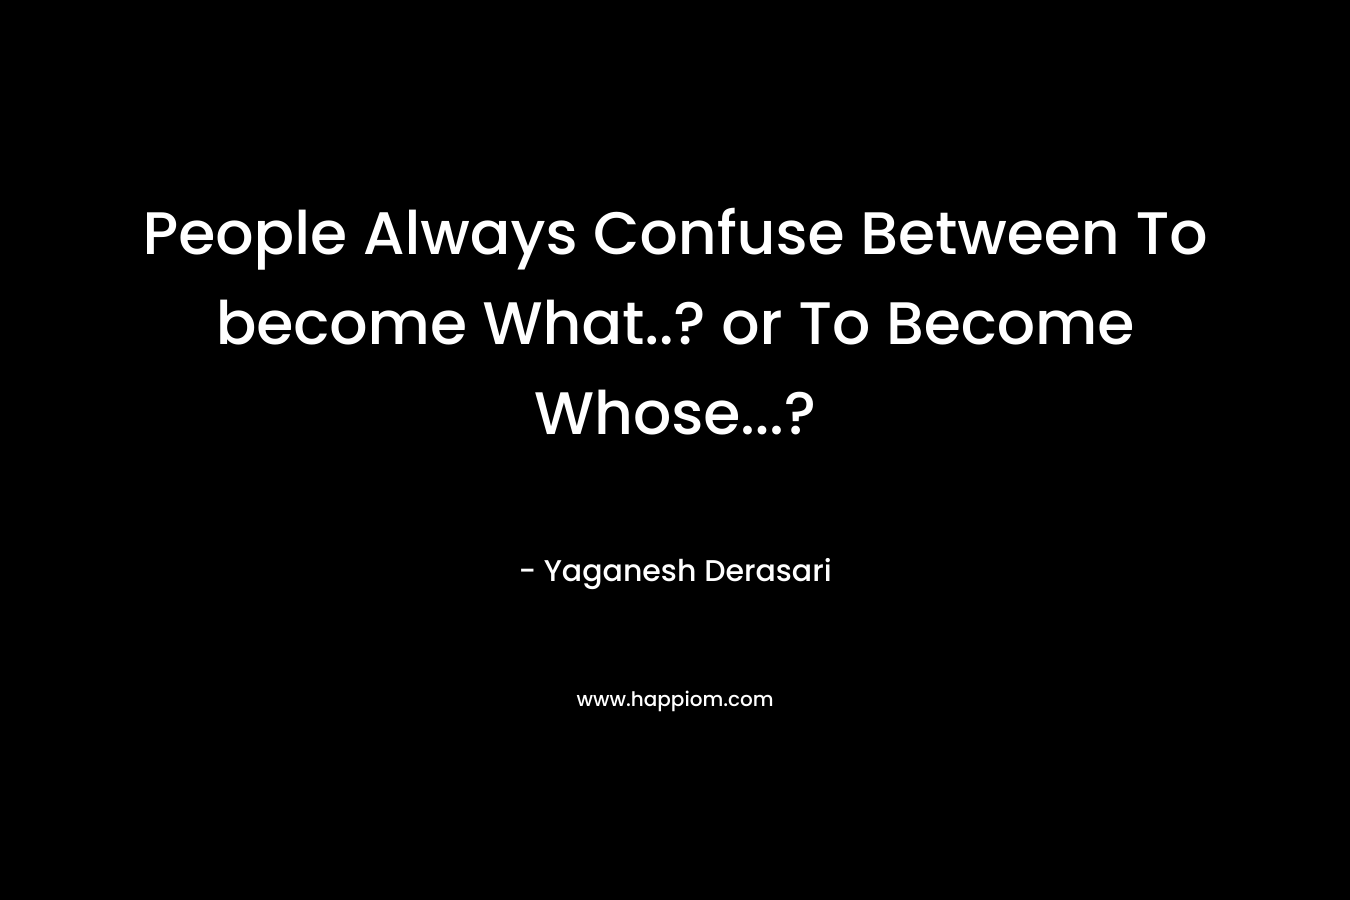 People Always Confuse Between To become What..? or To Become Whose...?